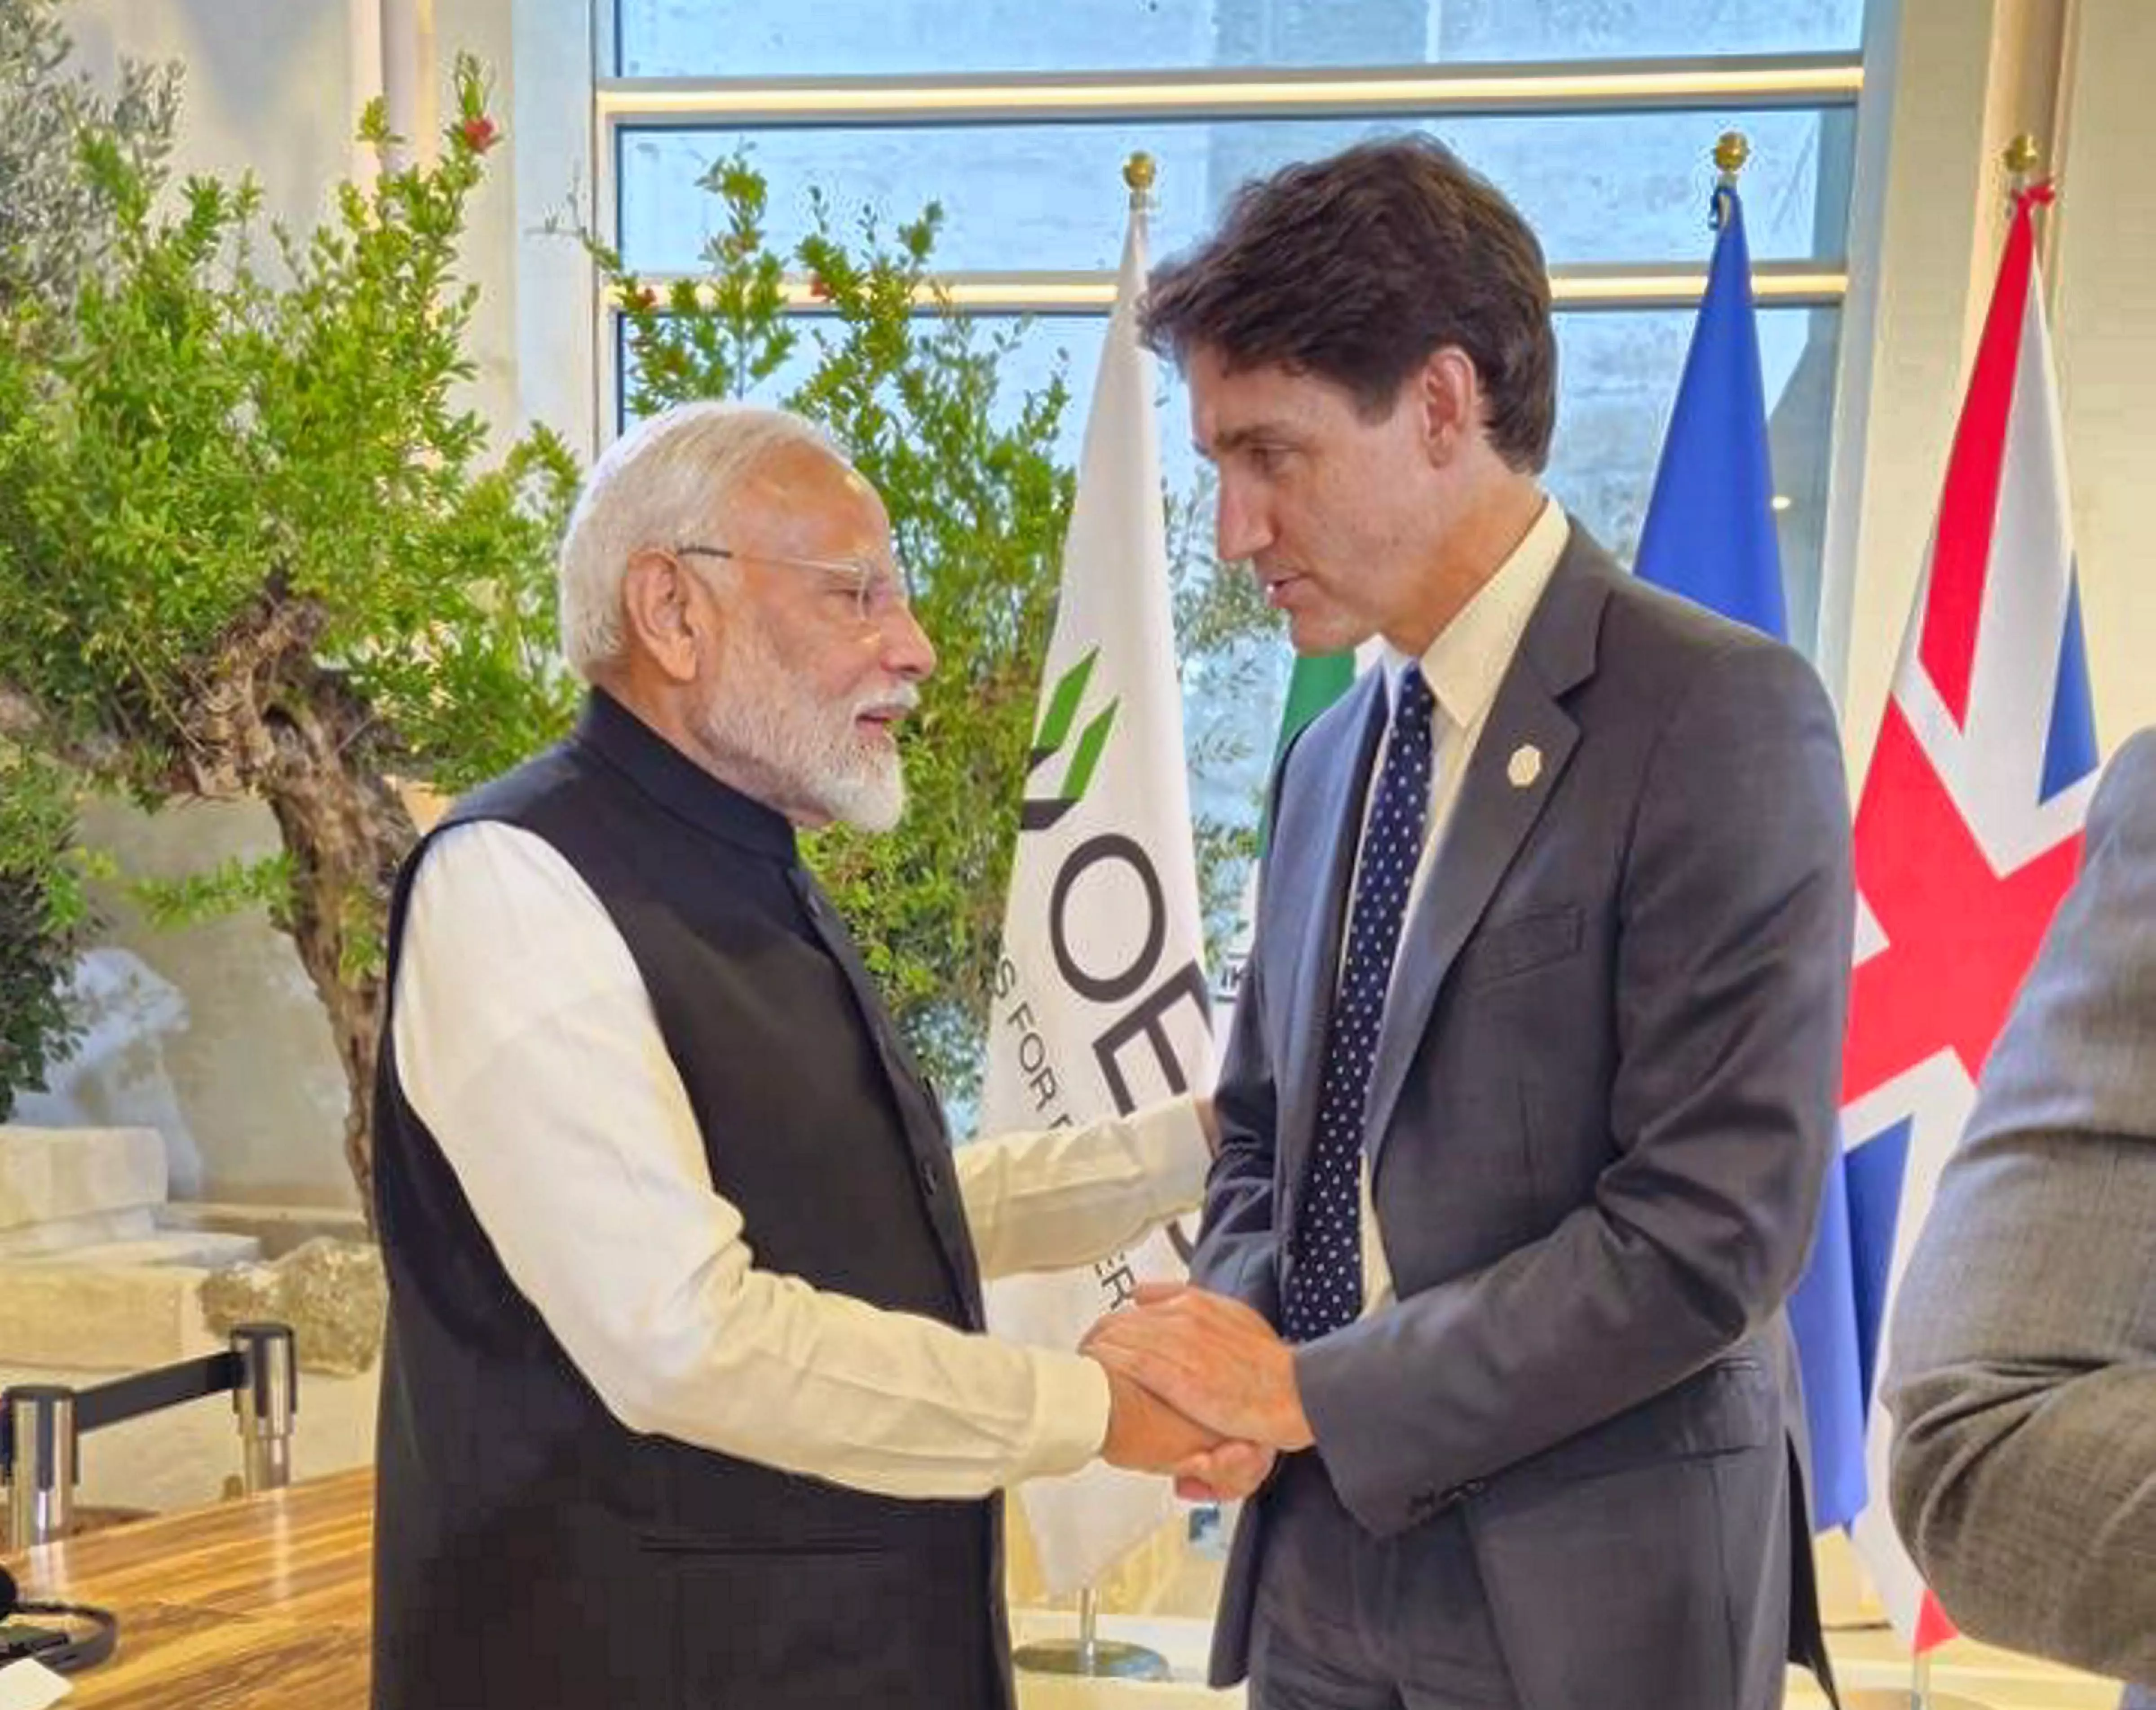 Modi-Trudeau icebreaker meet at G7 summit did not turn out as expected